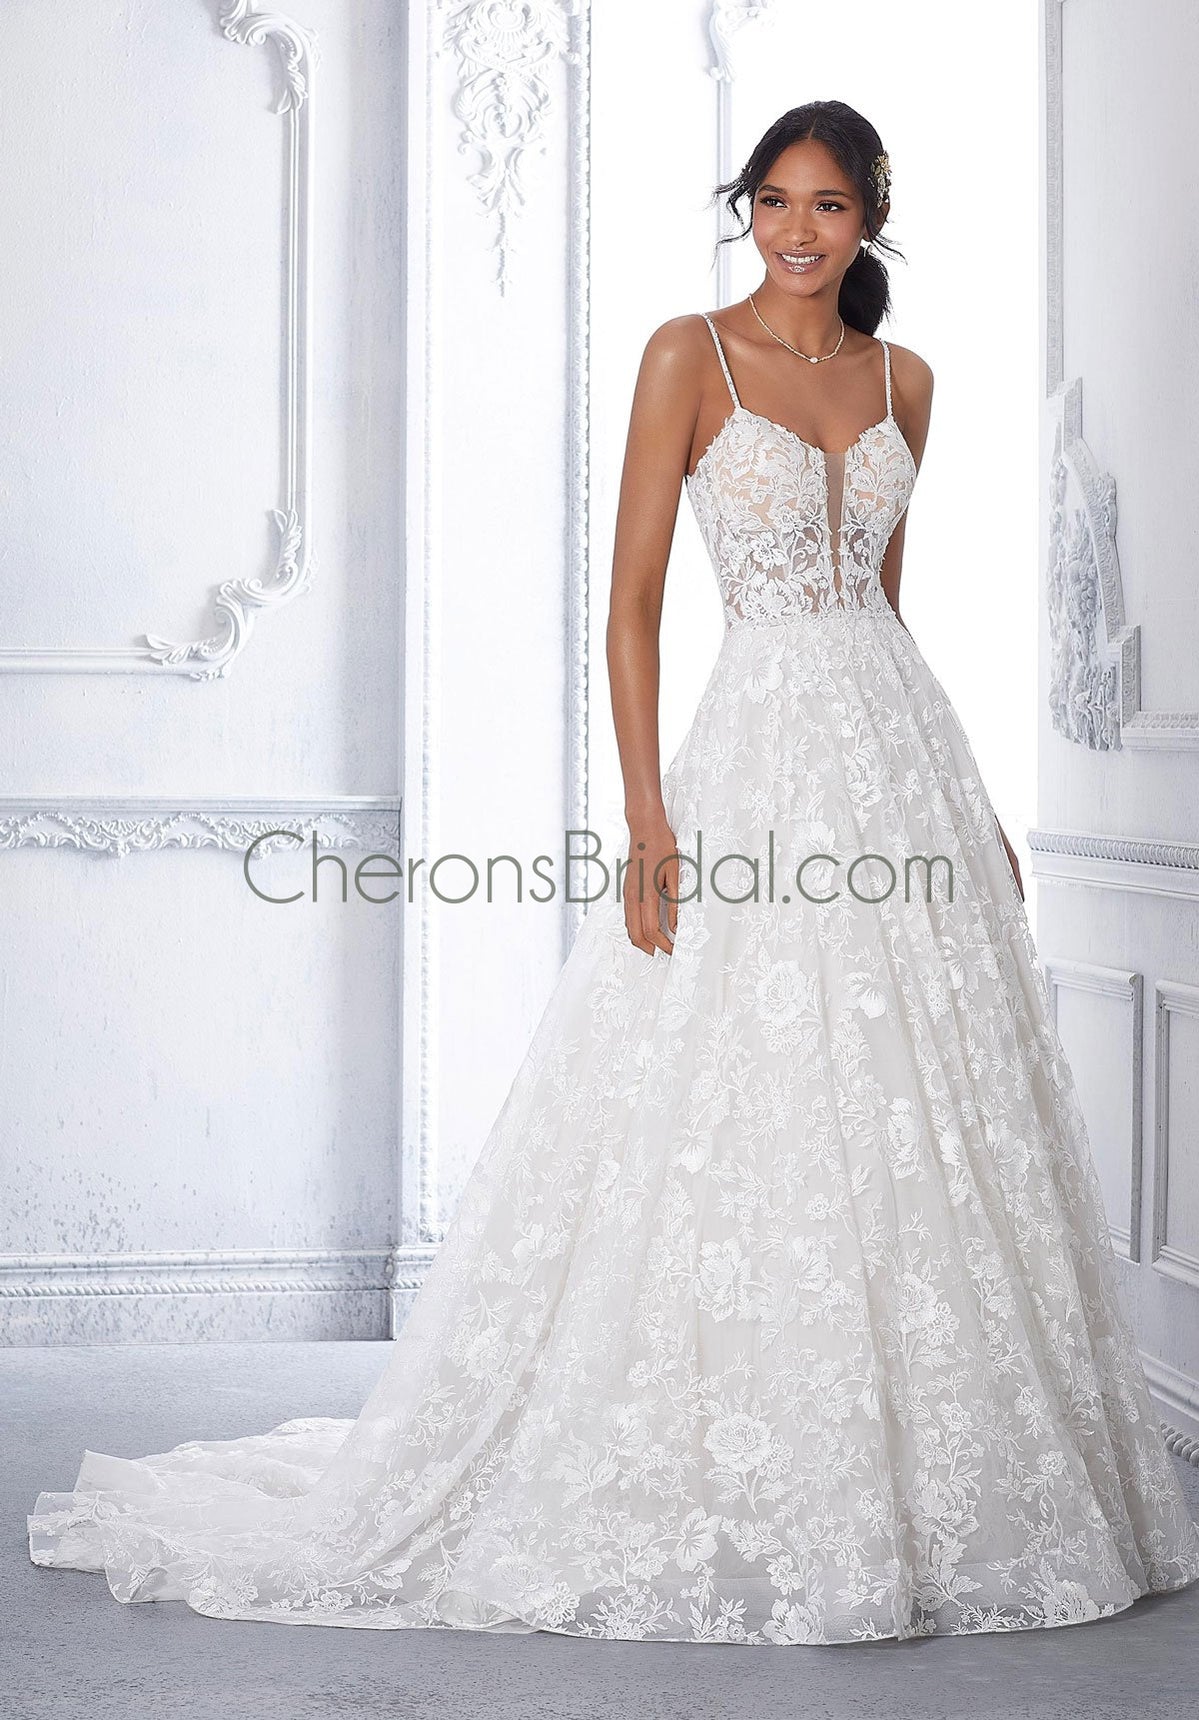 Morilee Line Wedding Dresses / Bridal Gowns - All Page 2